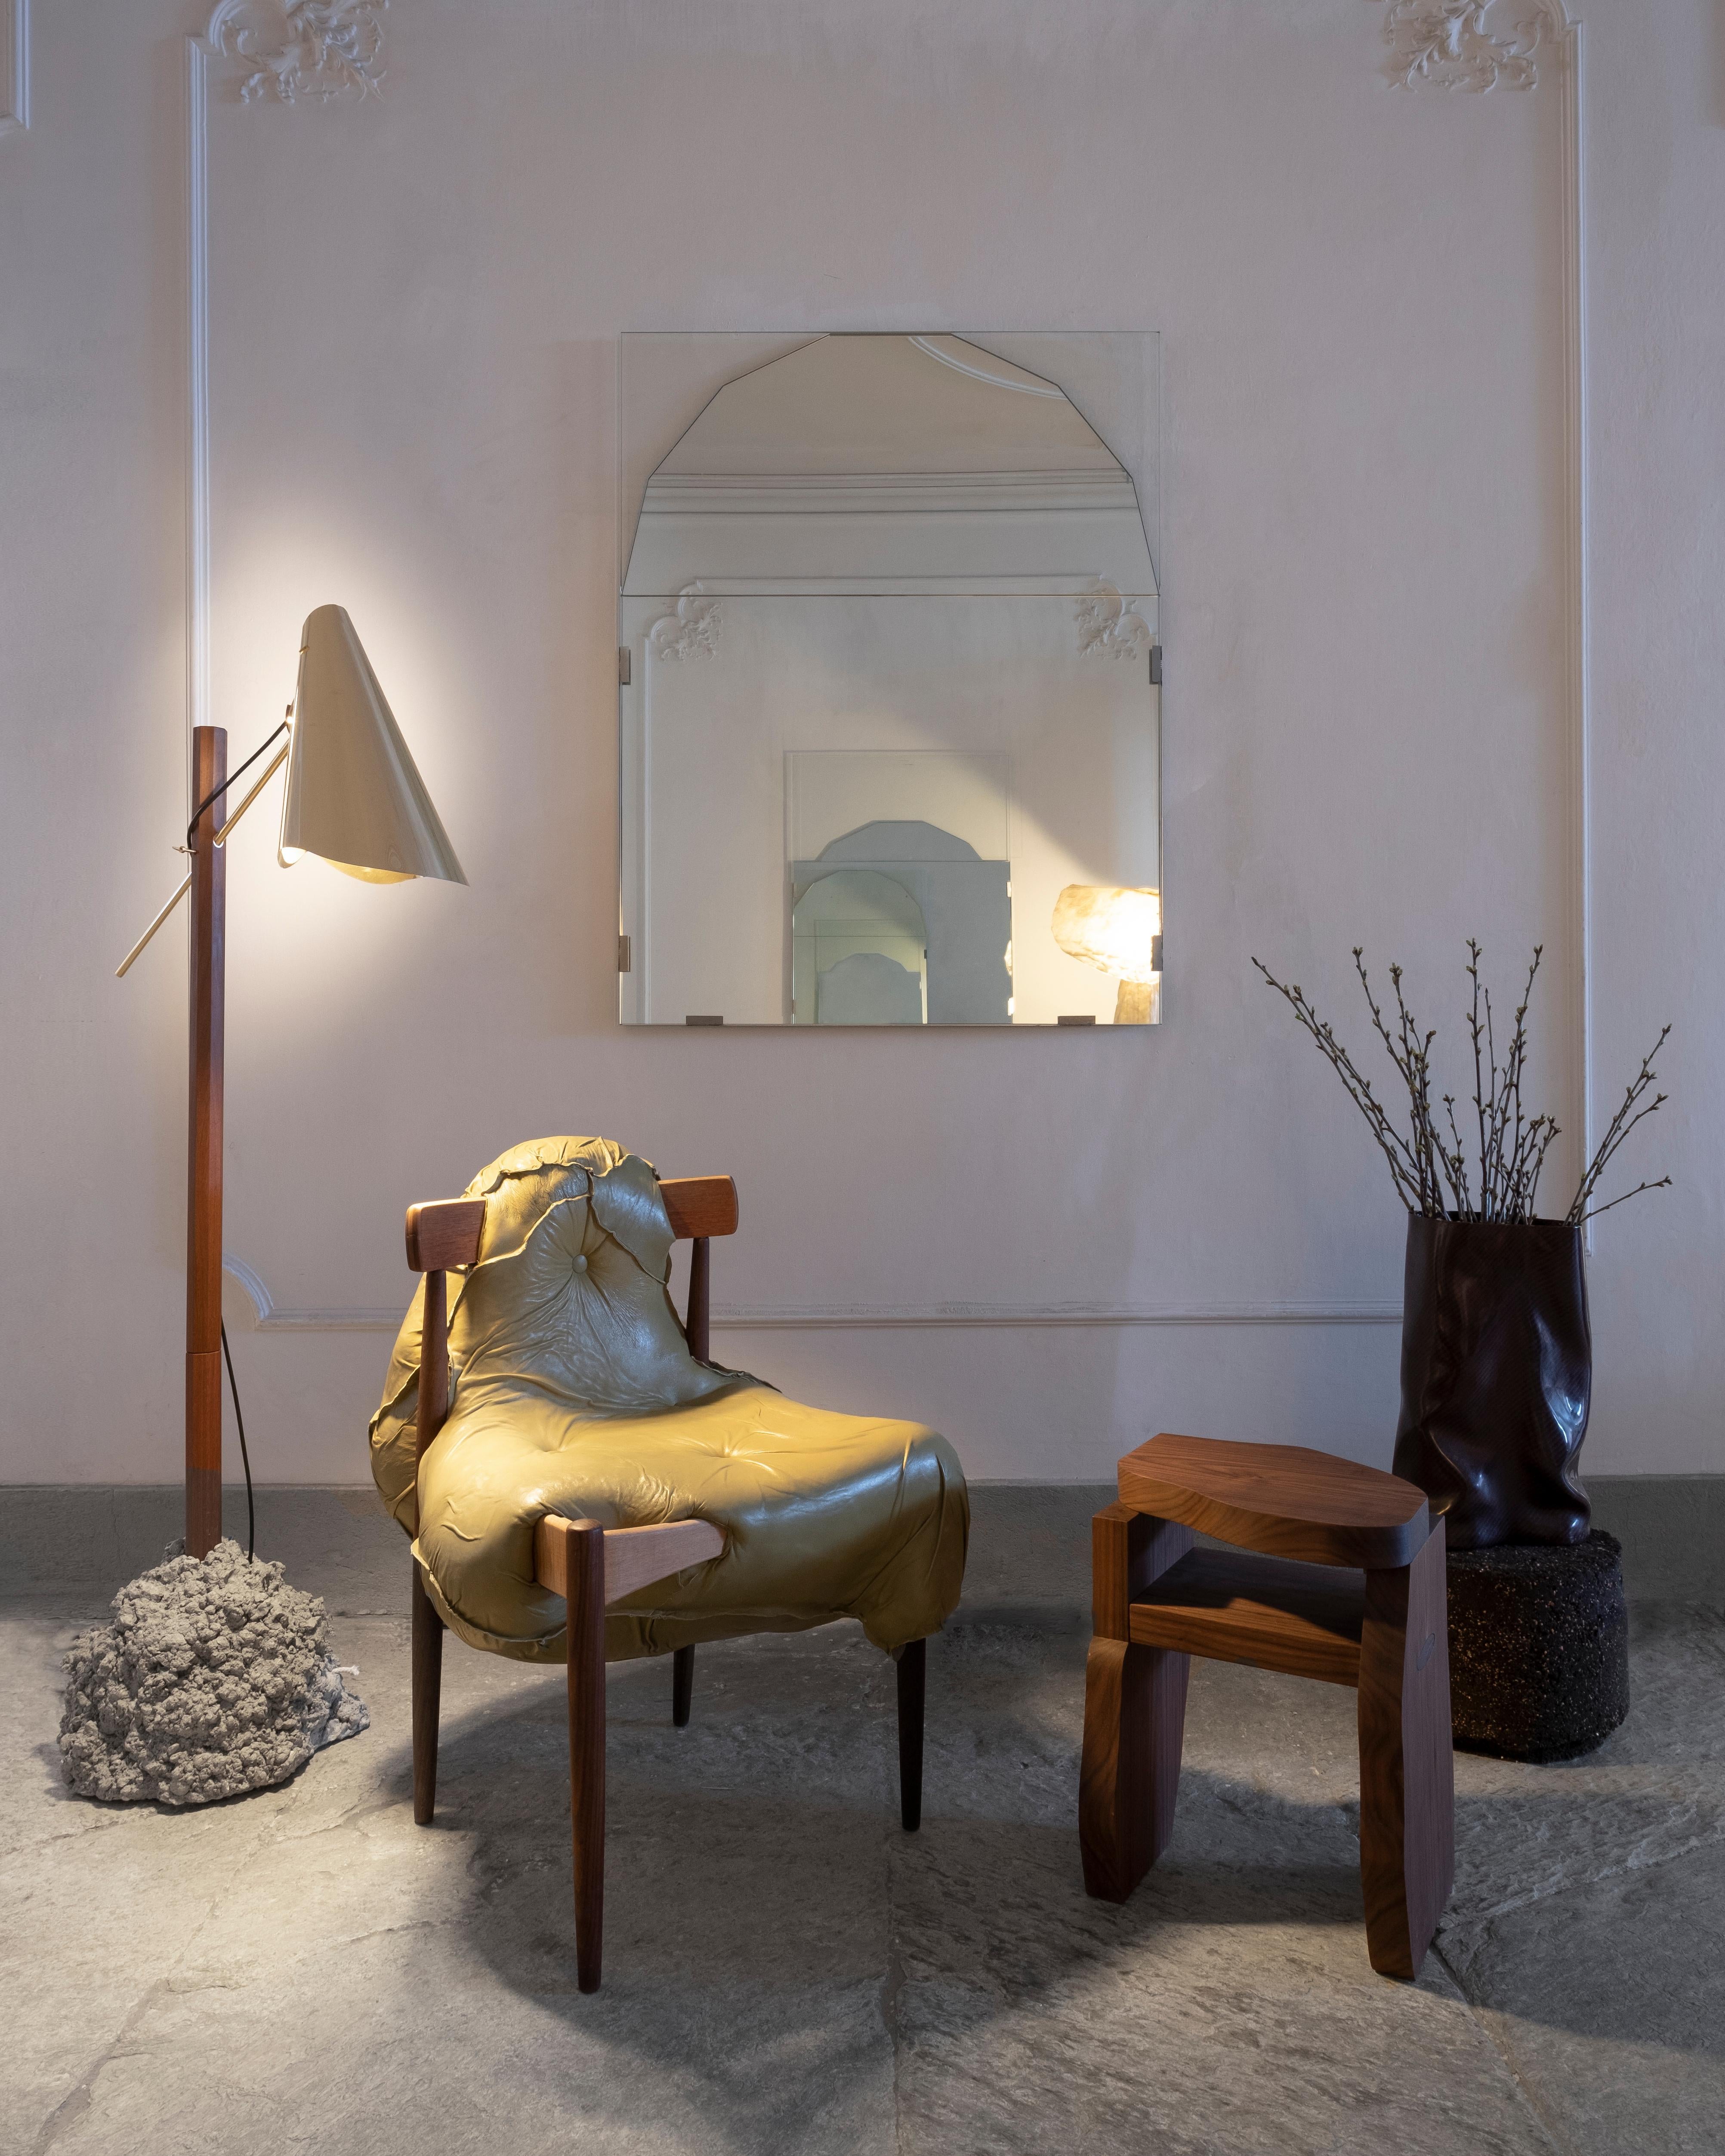 The Petite Street Lamp by Danish artist FOS, is a new version of the original Street Lamp, which has been shown at the State Museum in Copenhagen and various Céline stores world wide. The design and brass material of the shade, gives a warm and even